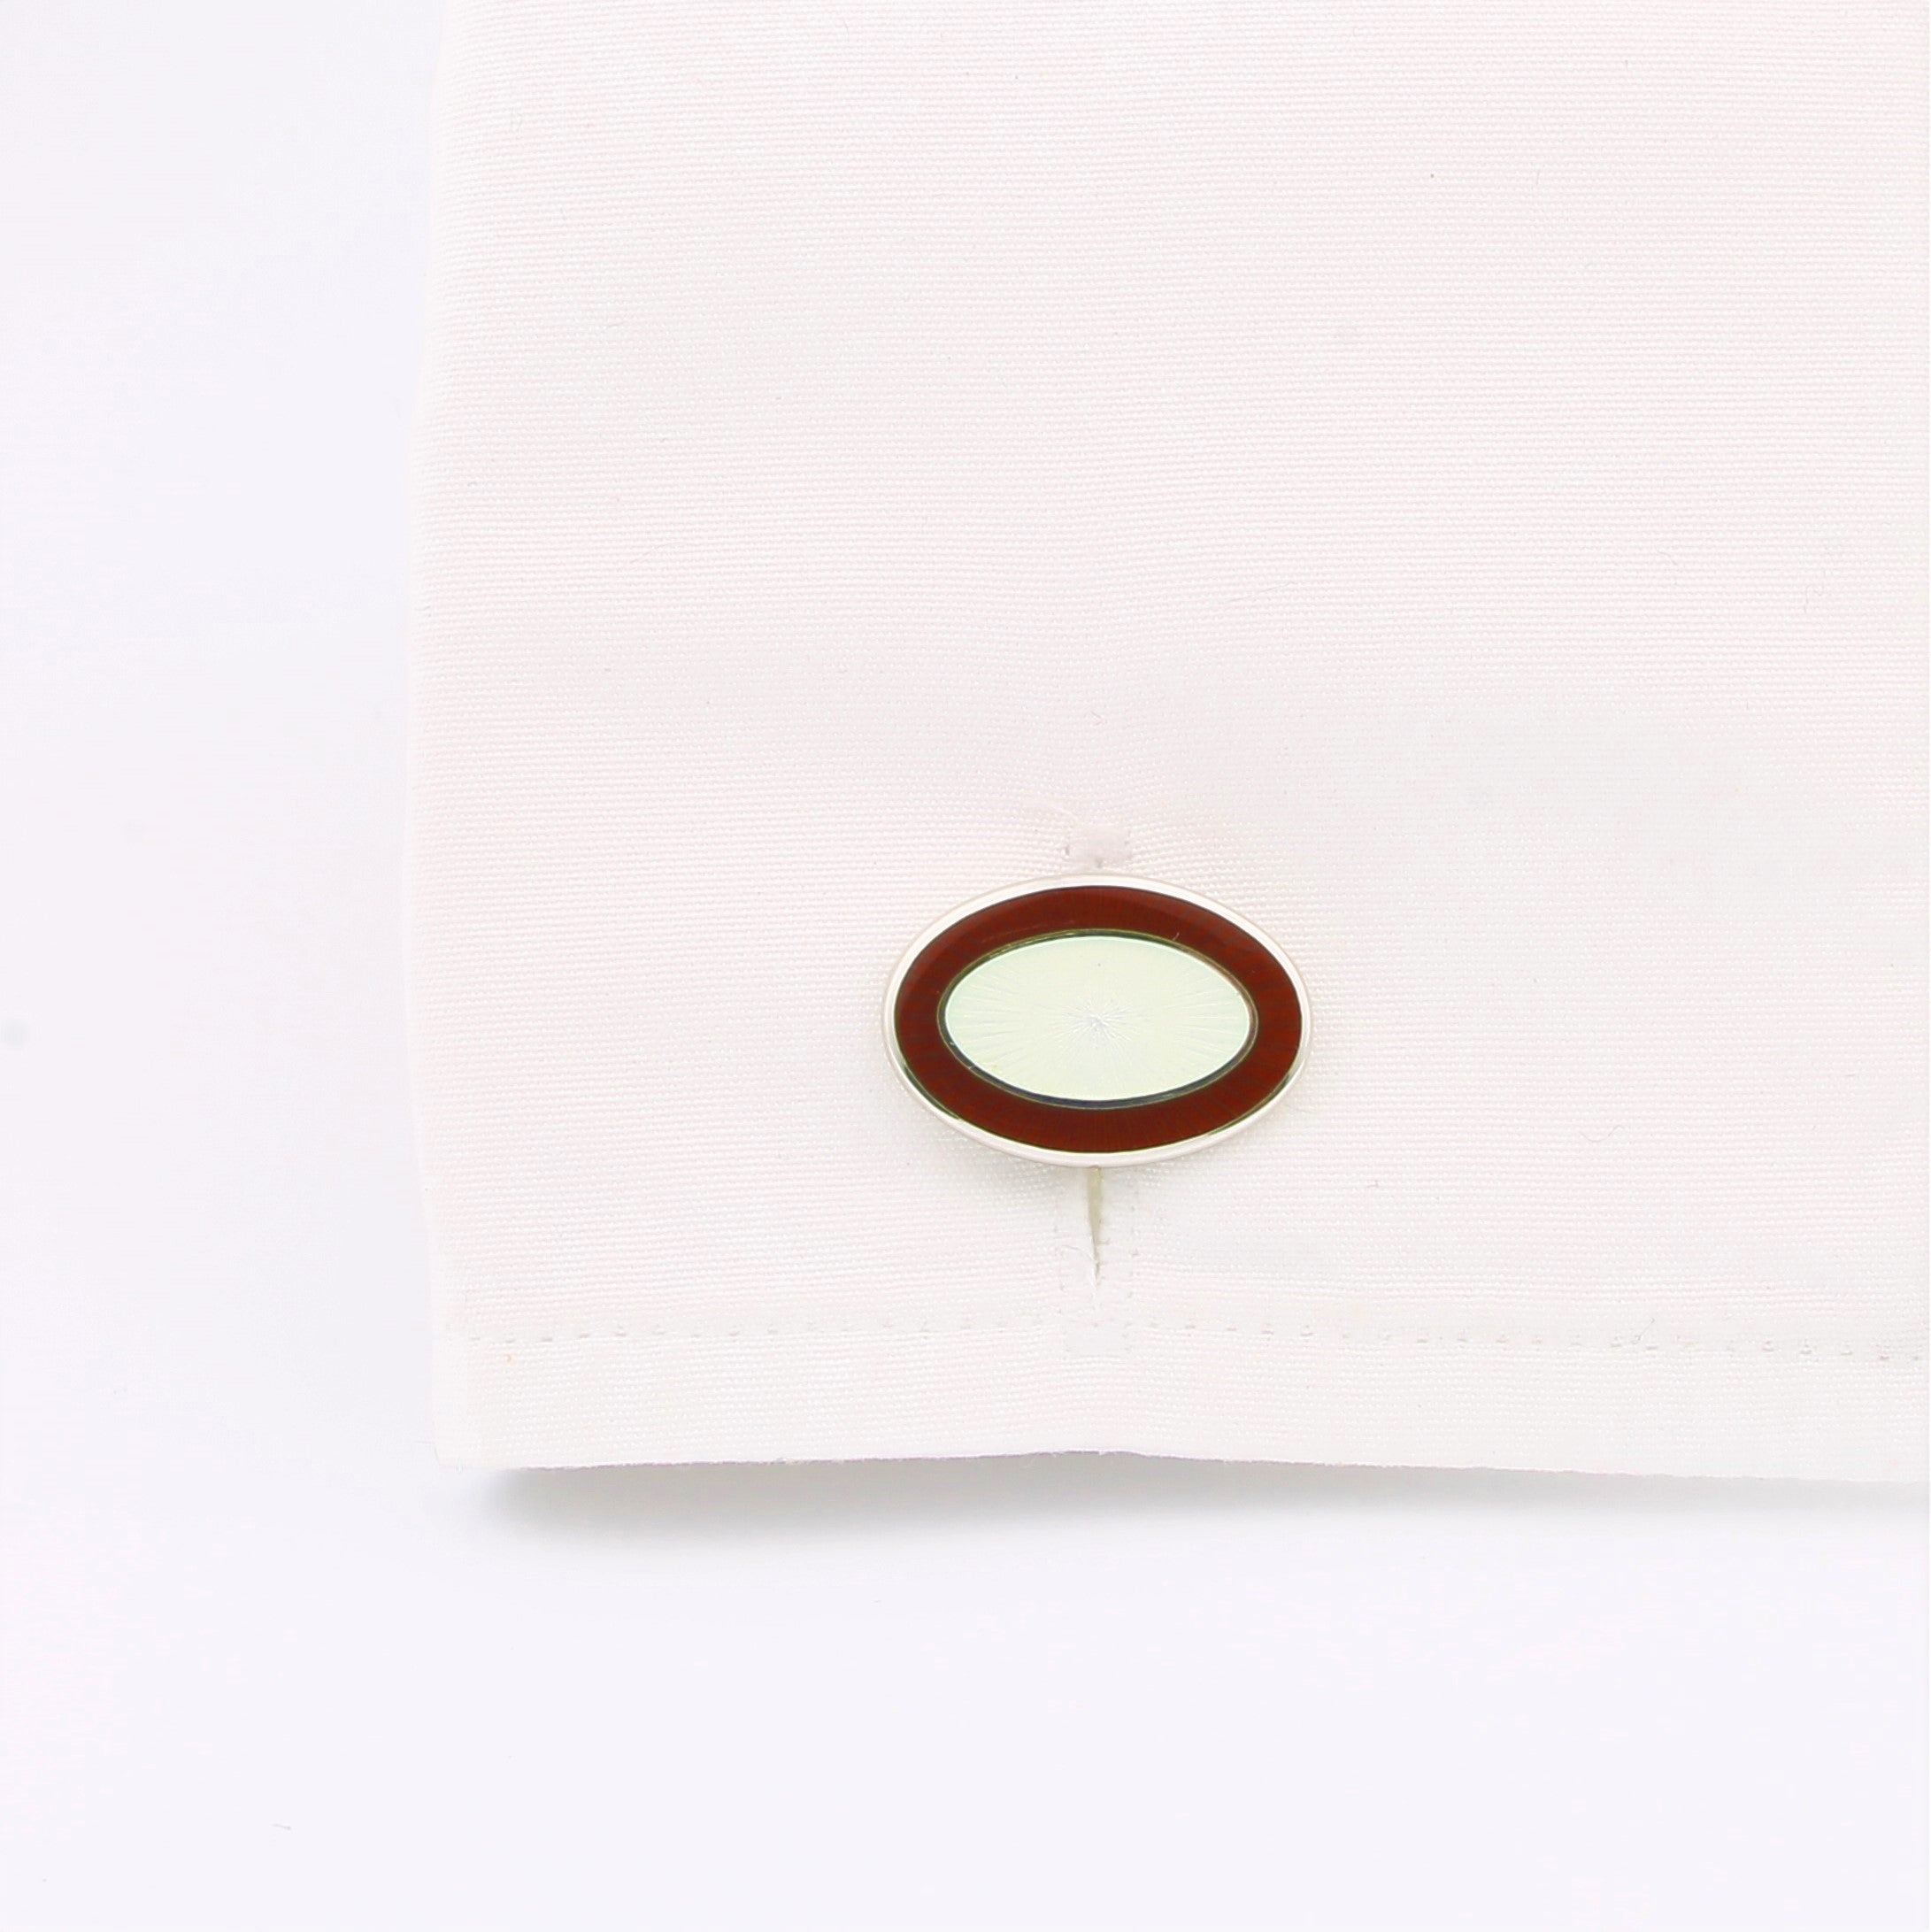 Double oval cufflinks in red and white enamel on silver - in a cuff